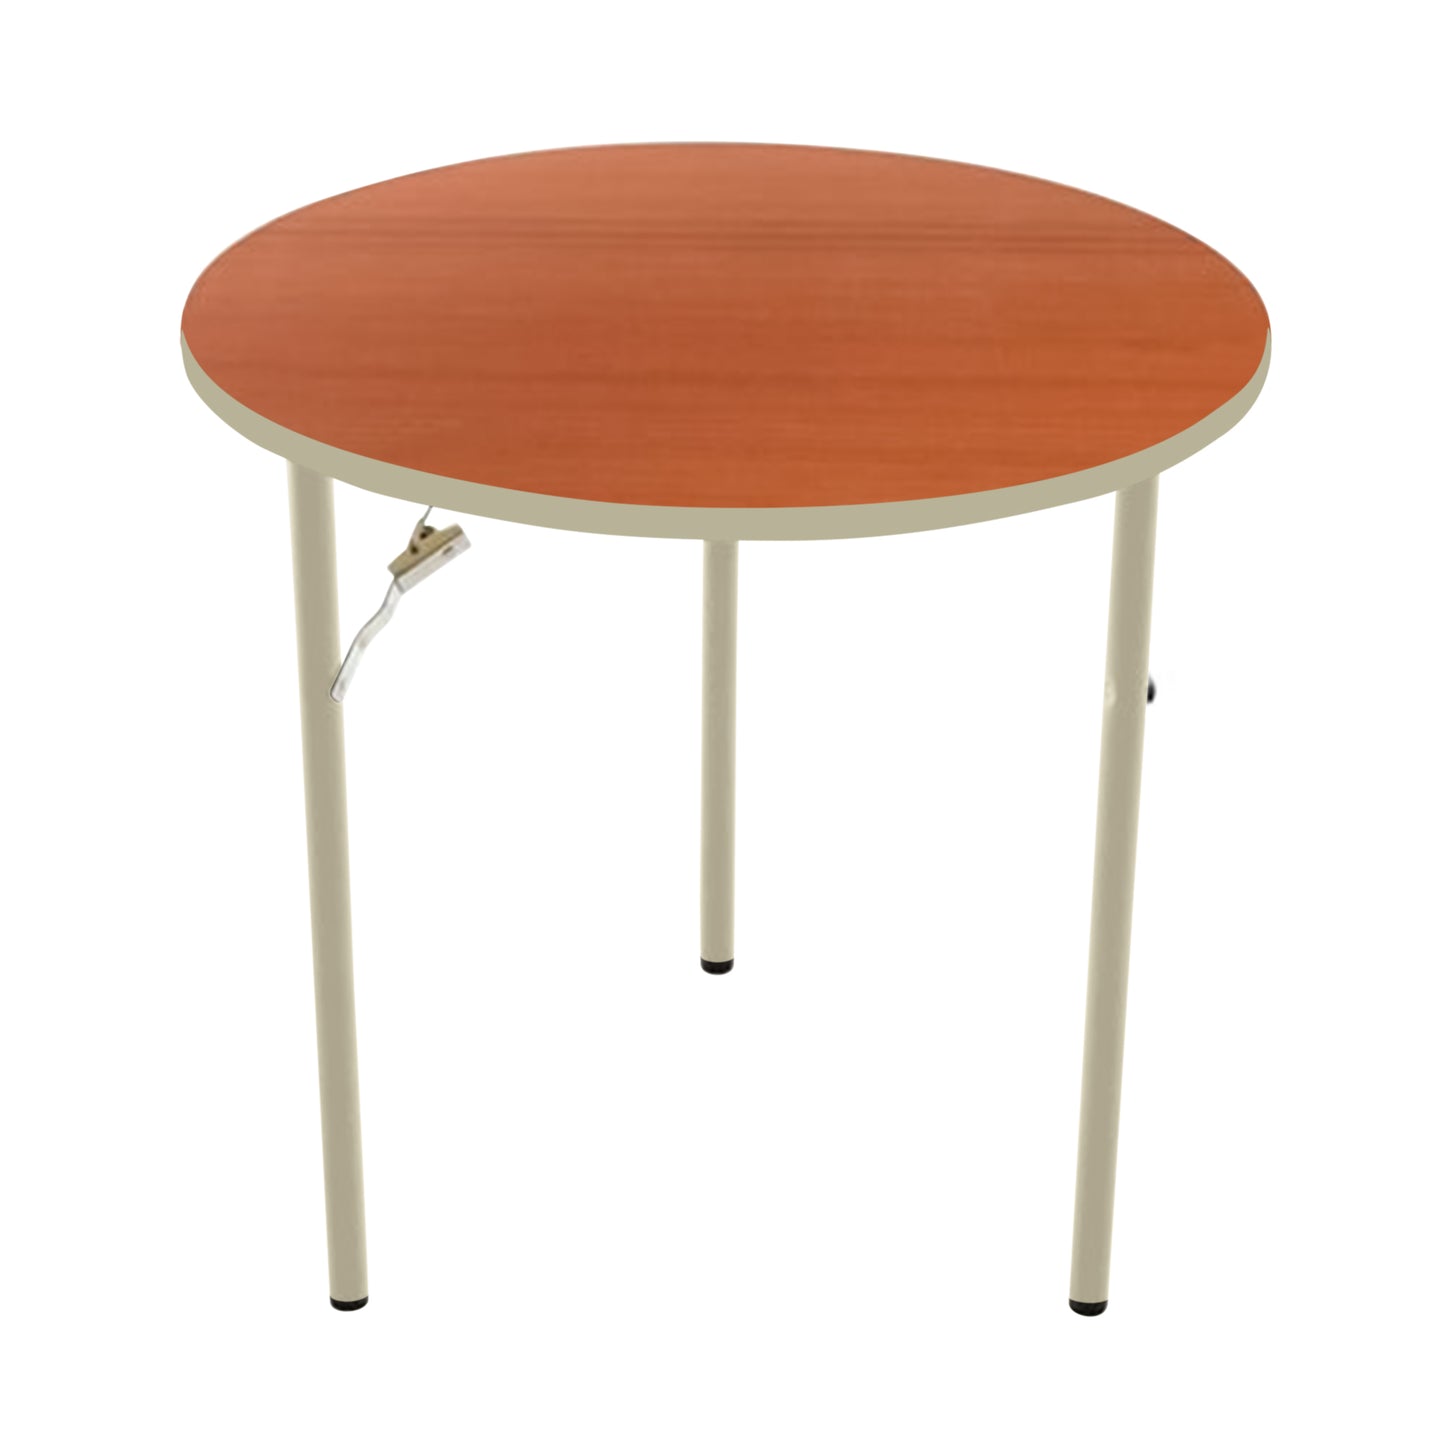 AmTab Folding Table - Plywood Stained and Sealed - Vinyl T-Molding Edge - Round - 60" Diameter x 29"H  (AmTab AMT-R60PM)